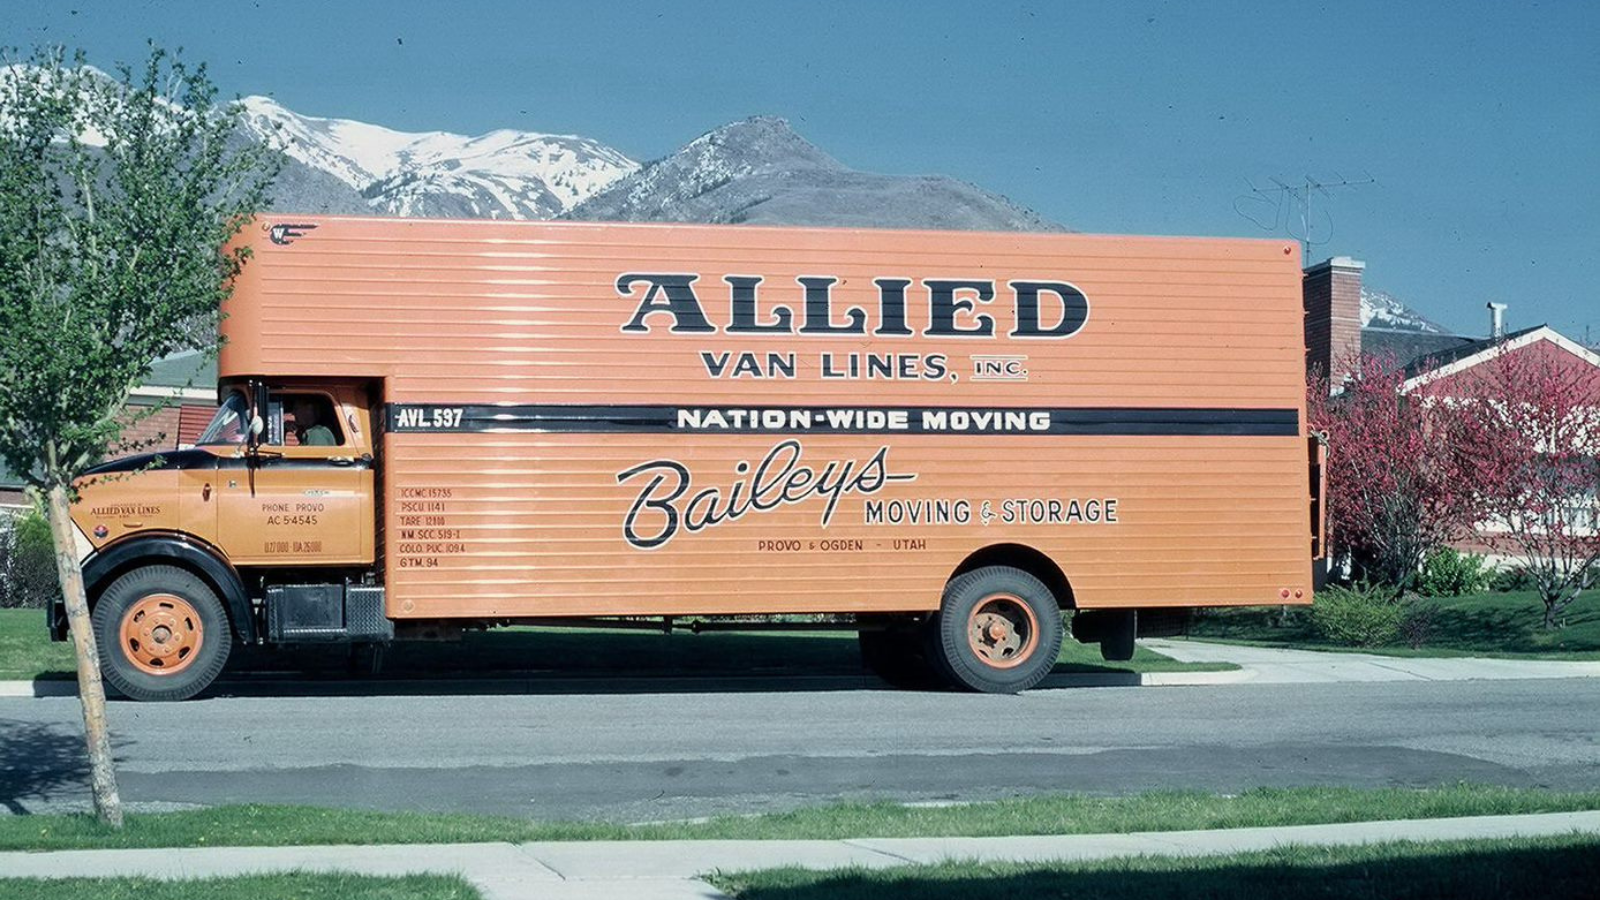 Historical colored image of a Bailey's Moving and Storage truck parked in front of mountains. 